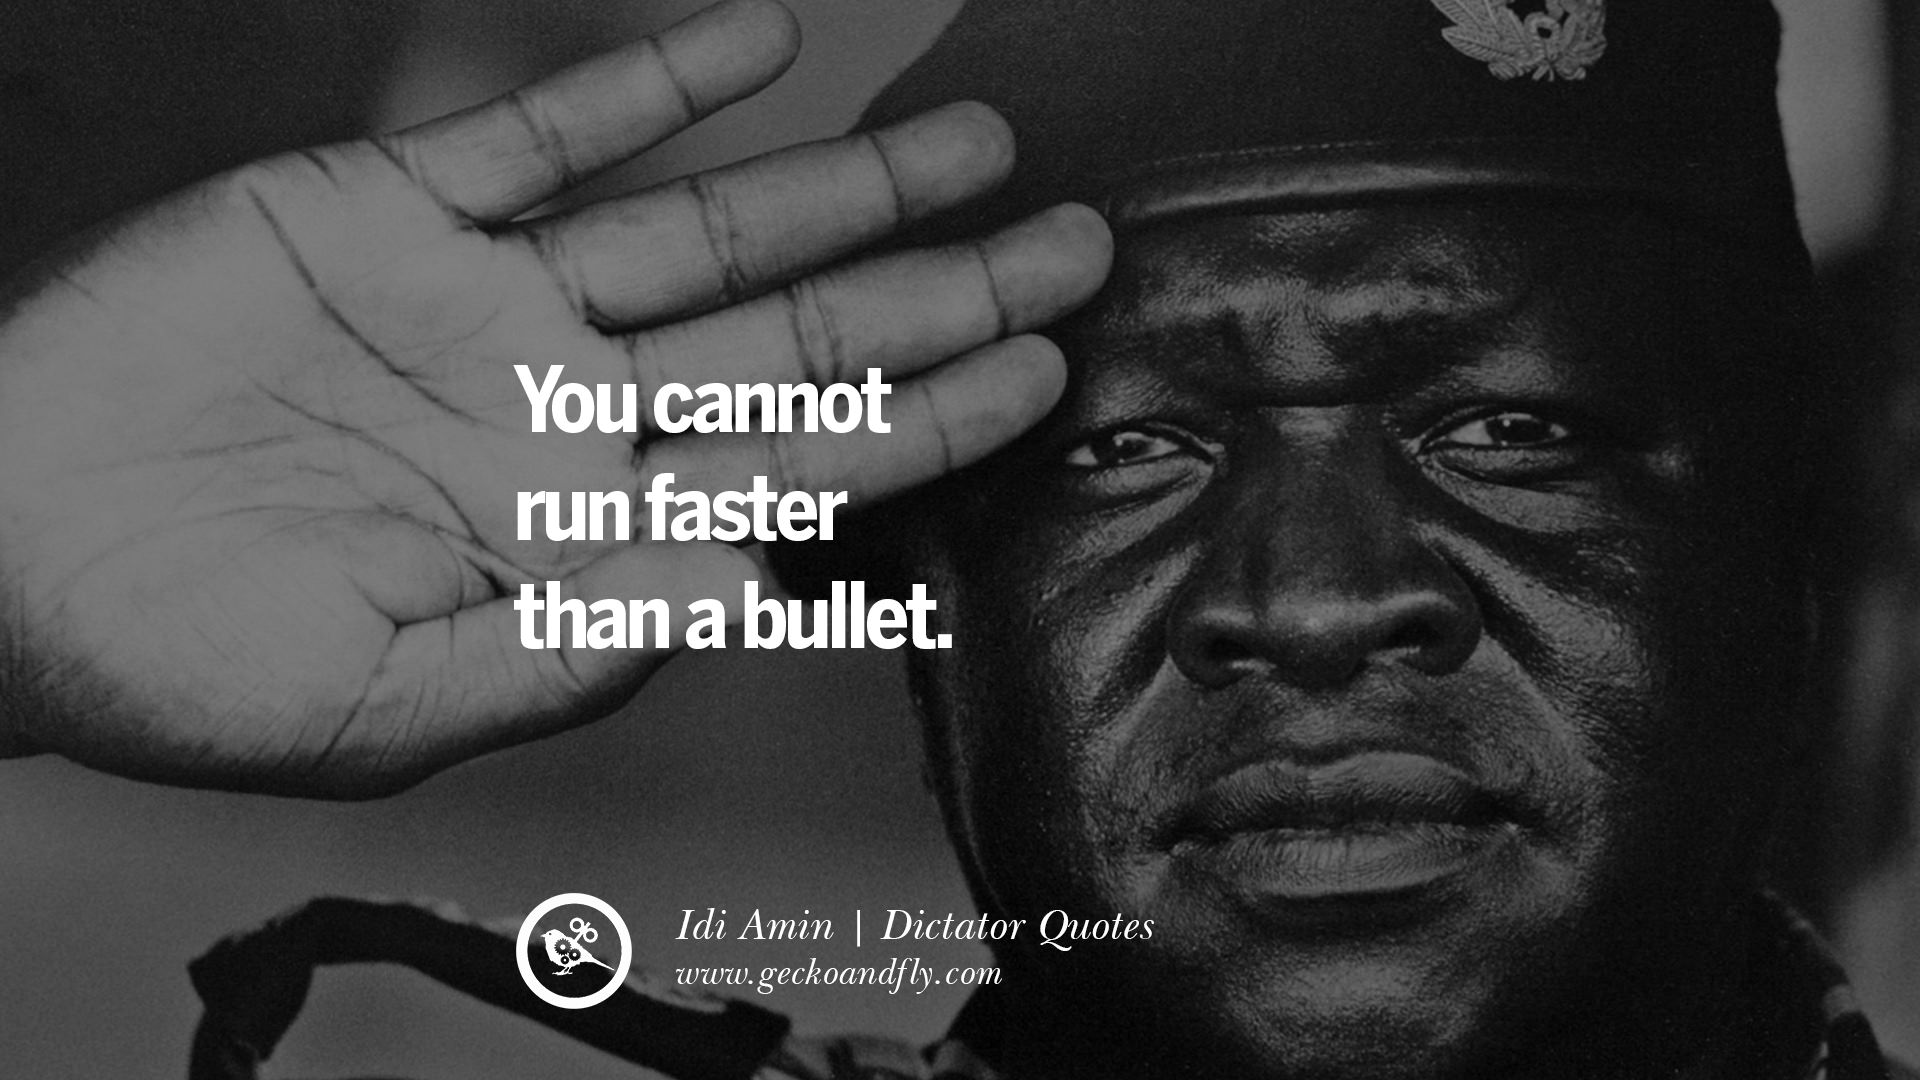 10 Famous Quotes By Some of the World's Worst Dictators